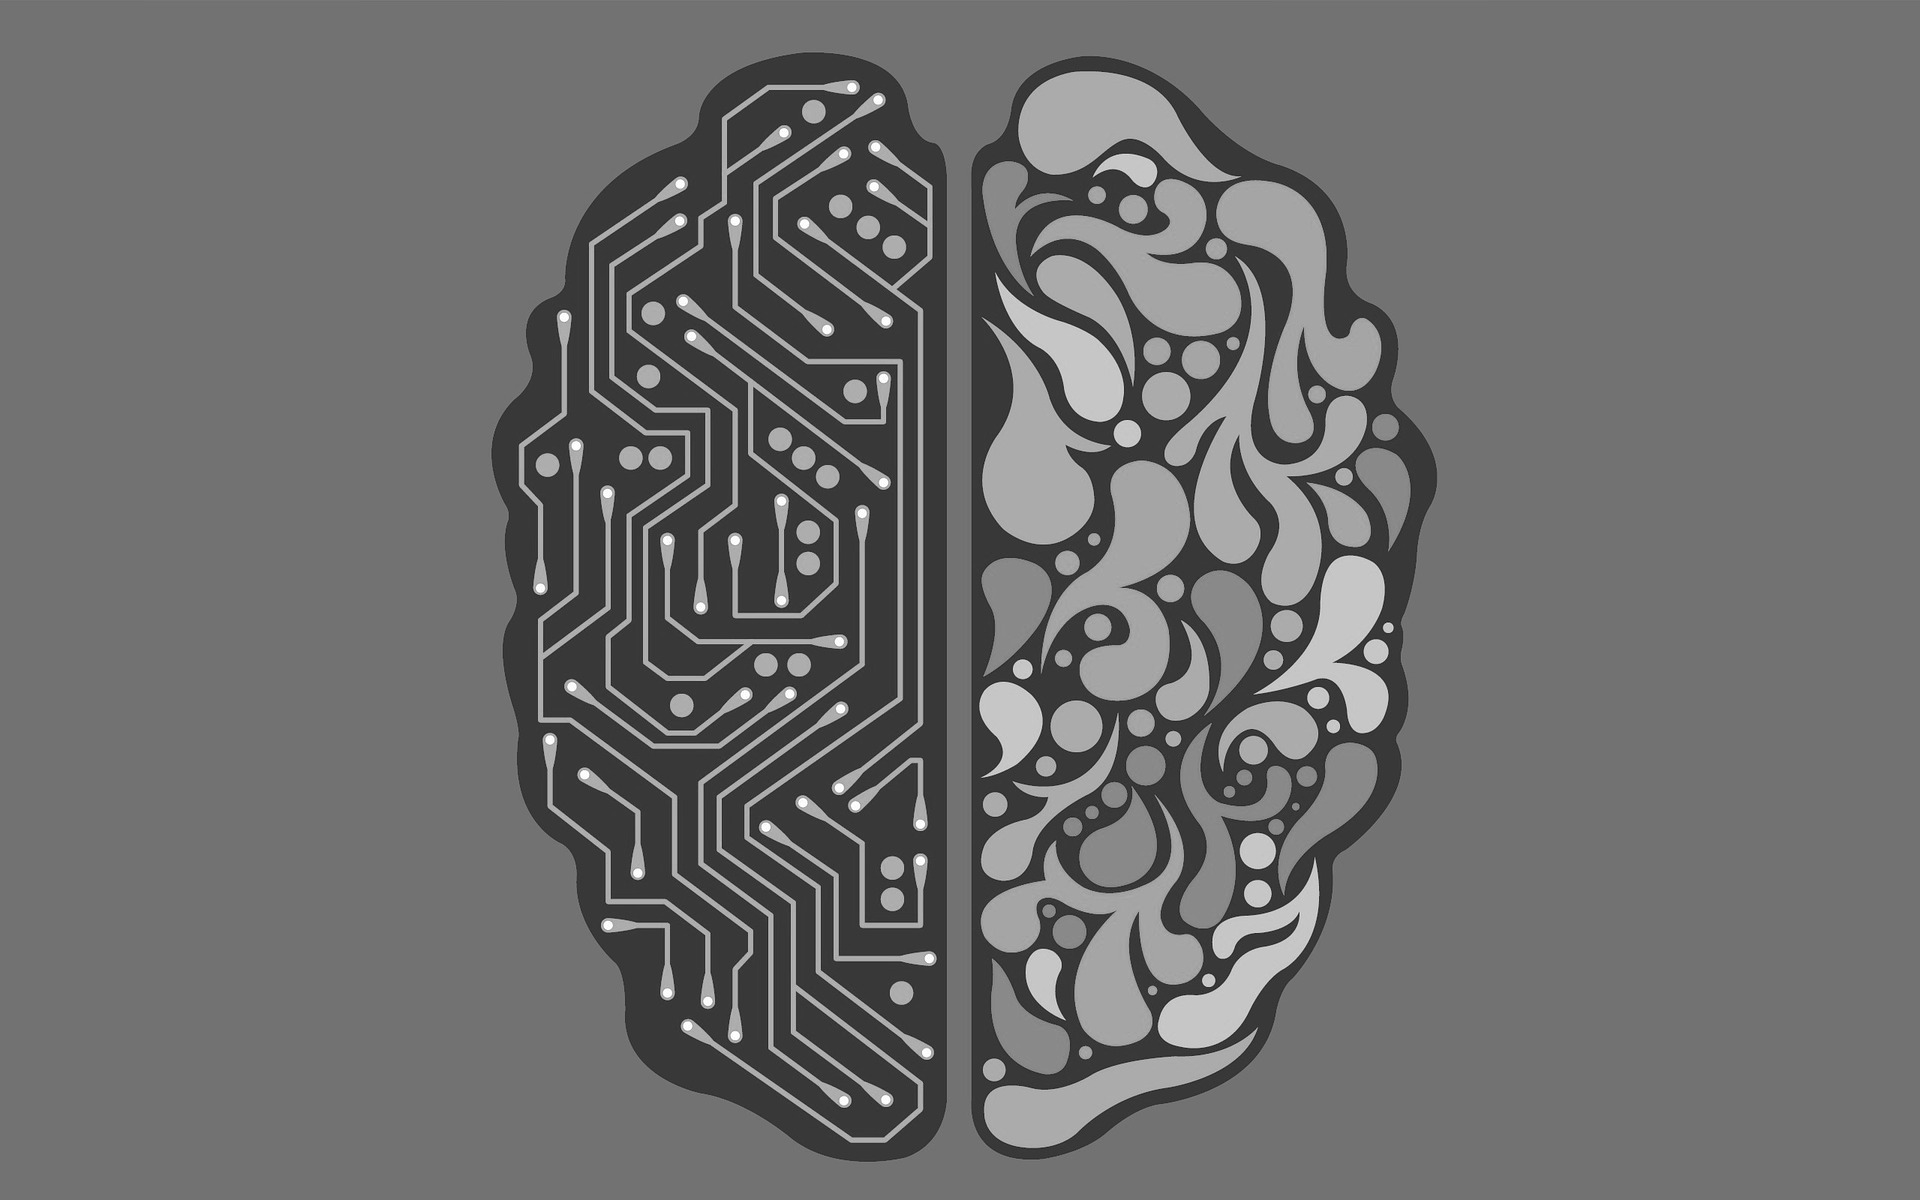 Blog Artificial-intelligence and trademarks